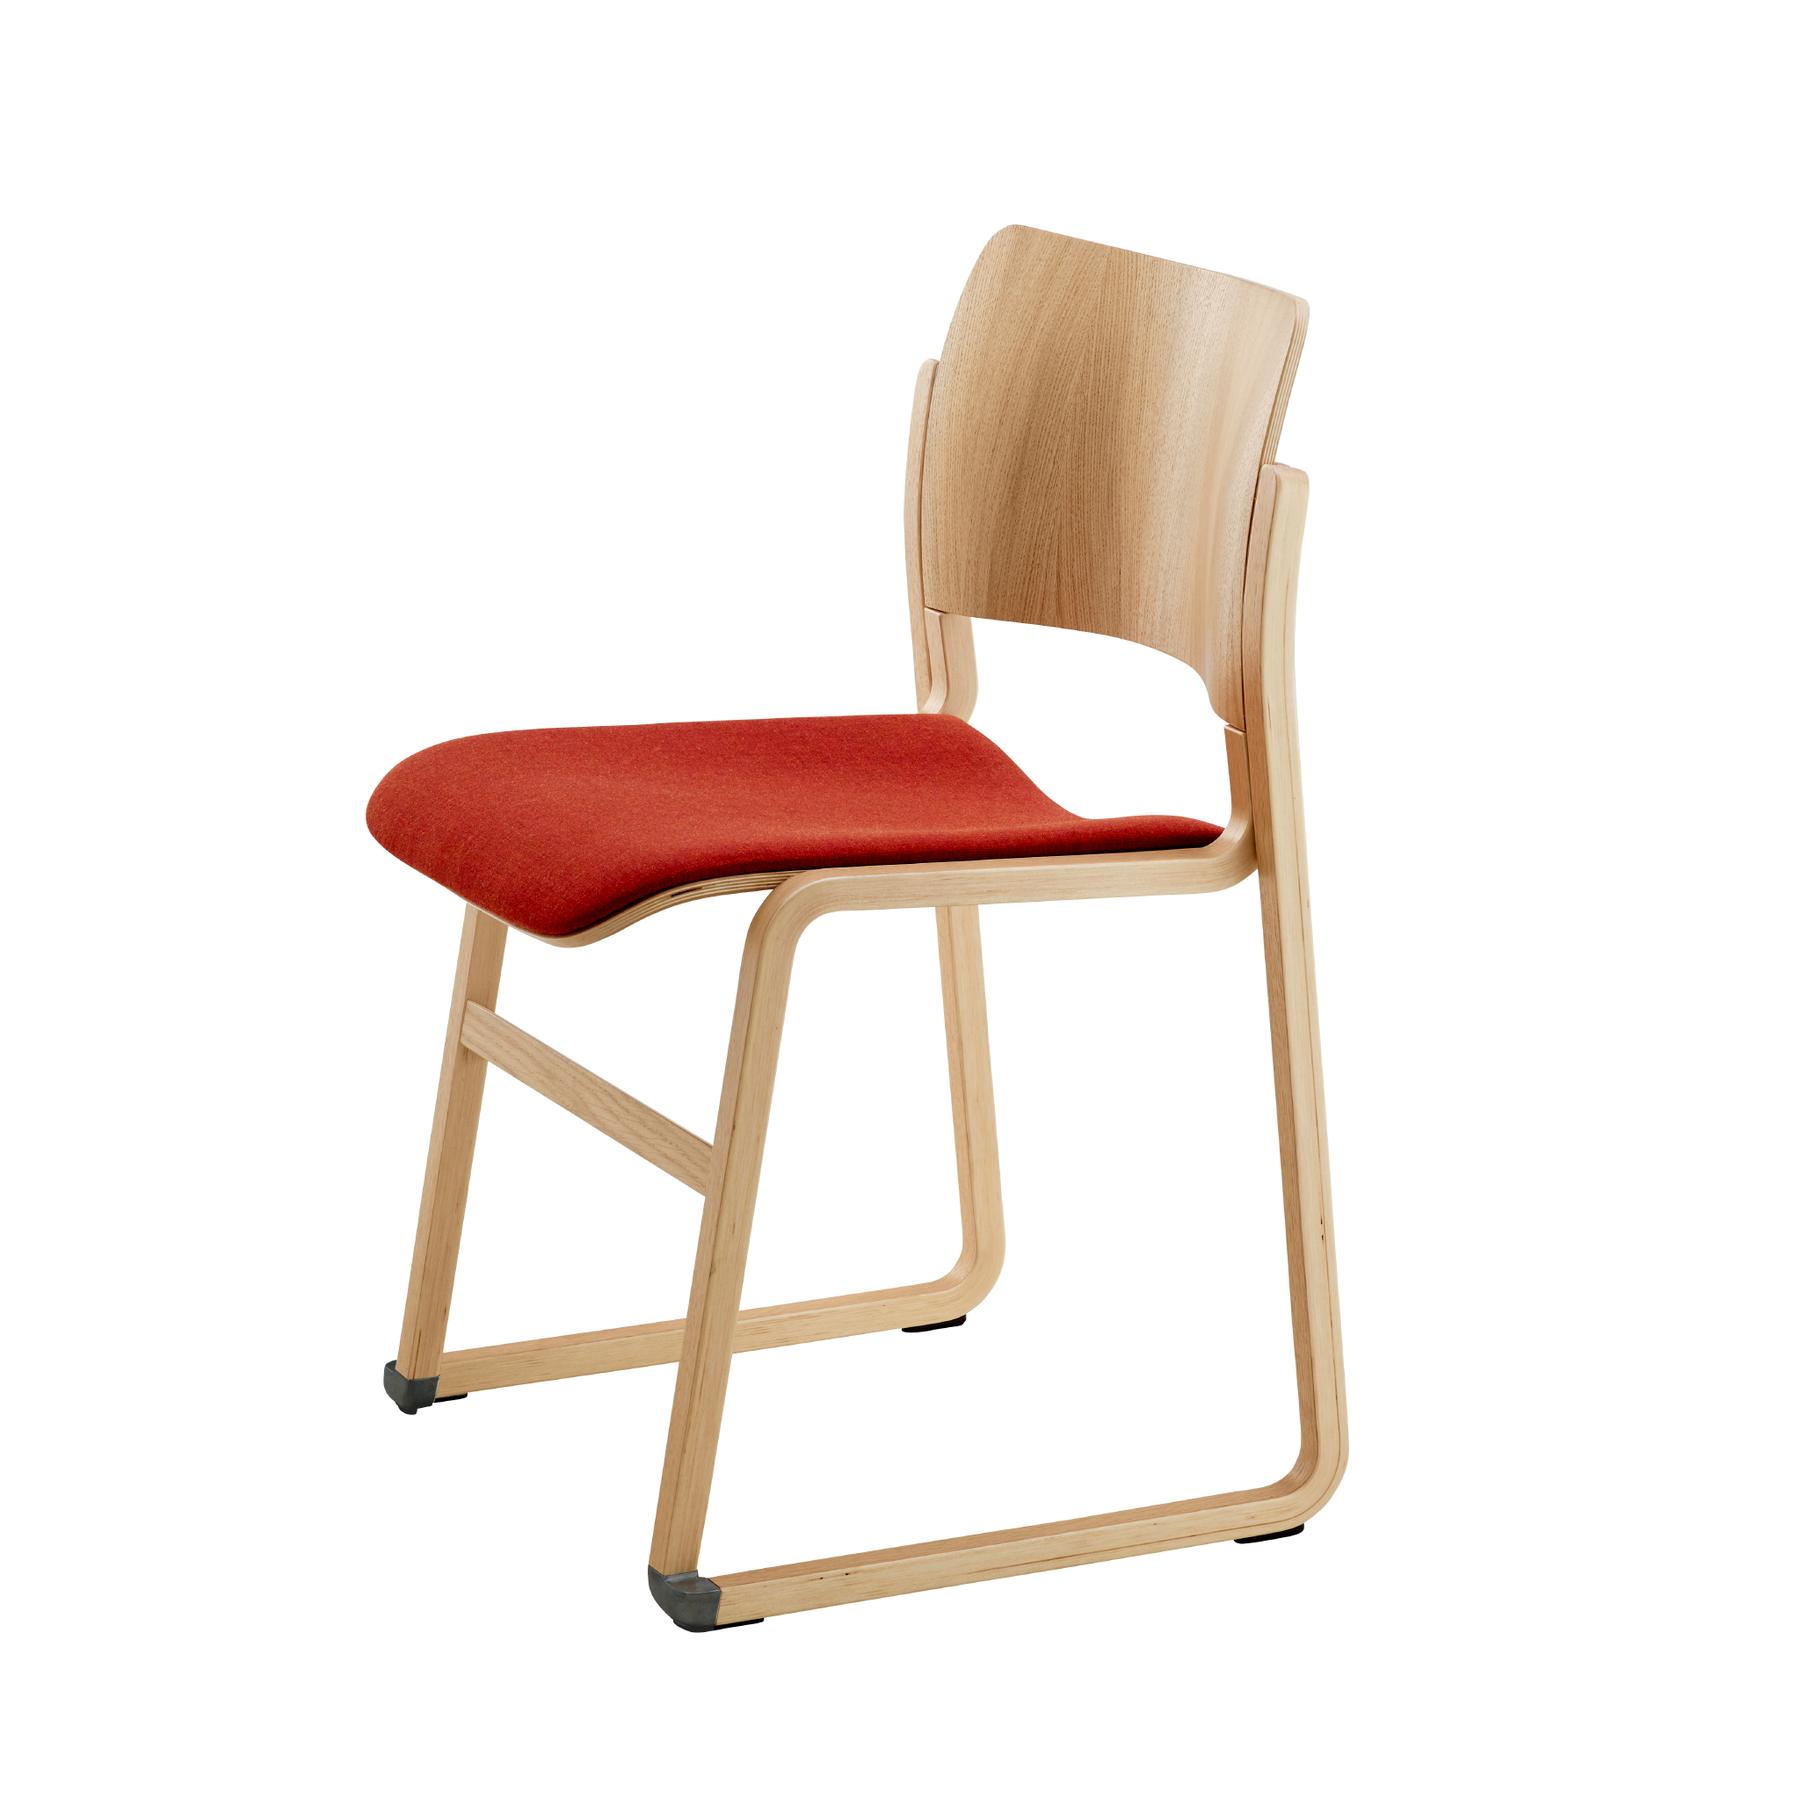 Howe 40/4 upholstered wood stacking chair view